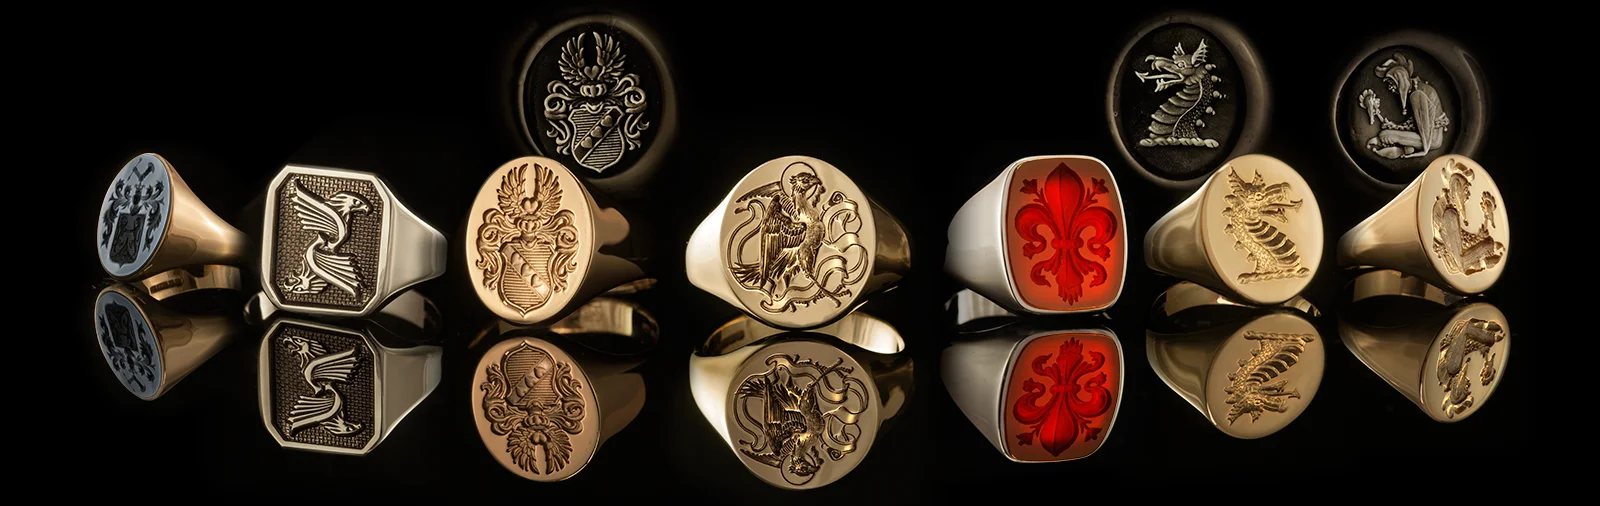 Selection of signet rings with custom deep engravings by Dexter